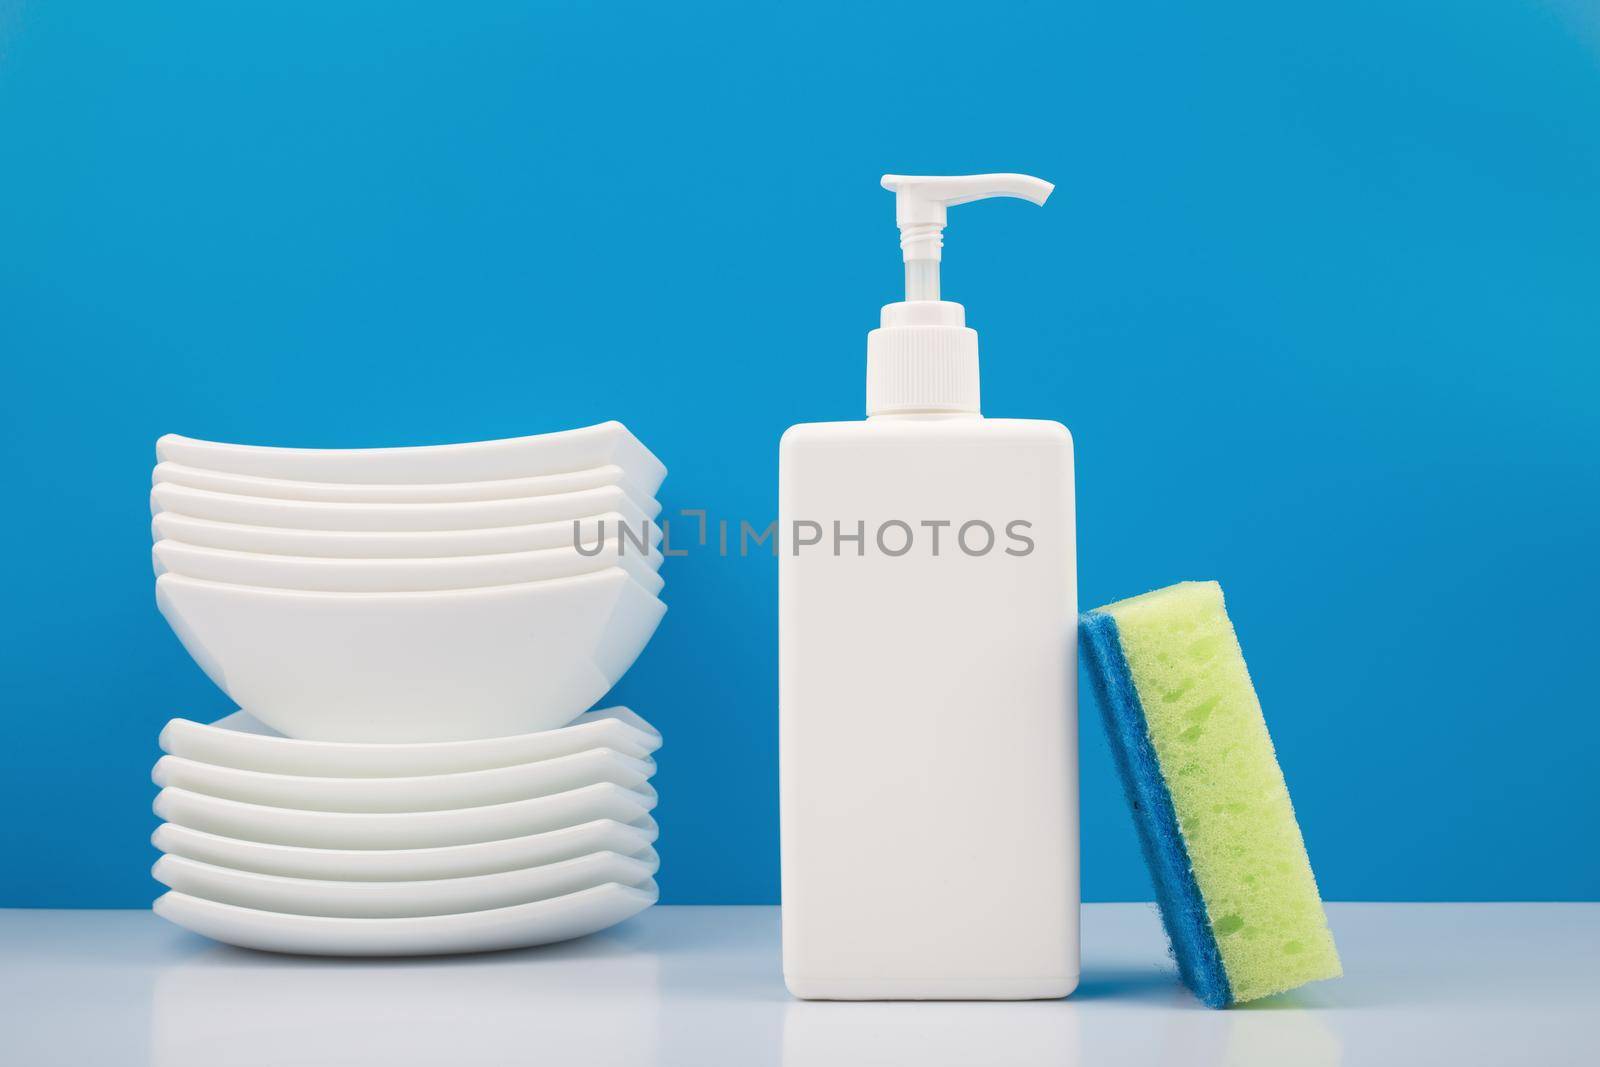 Colorful dishwashing concept, creative composition with liquid detergent in white plastic bottle with dispenser, green cleaning sponge and pile of clean plates on white table against blue background